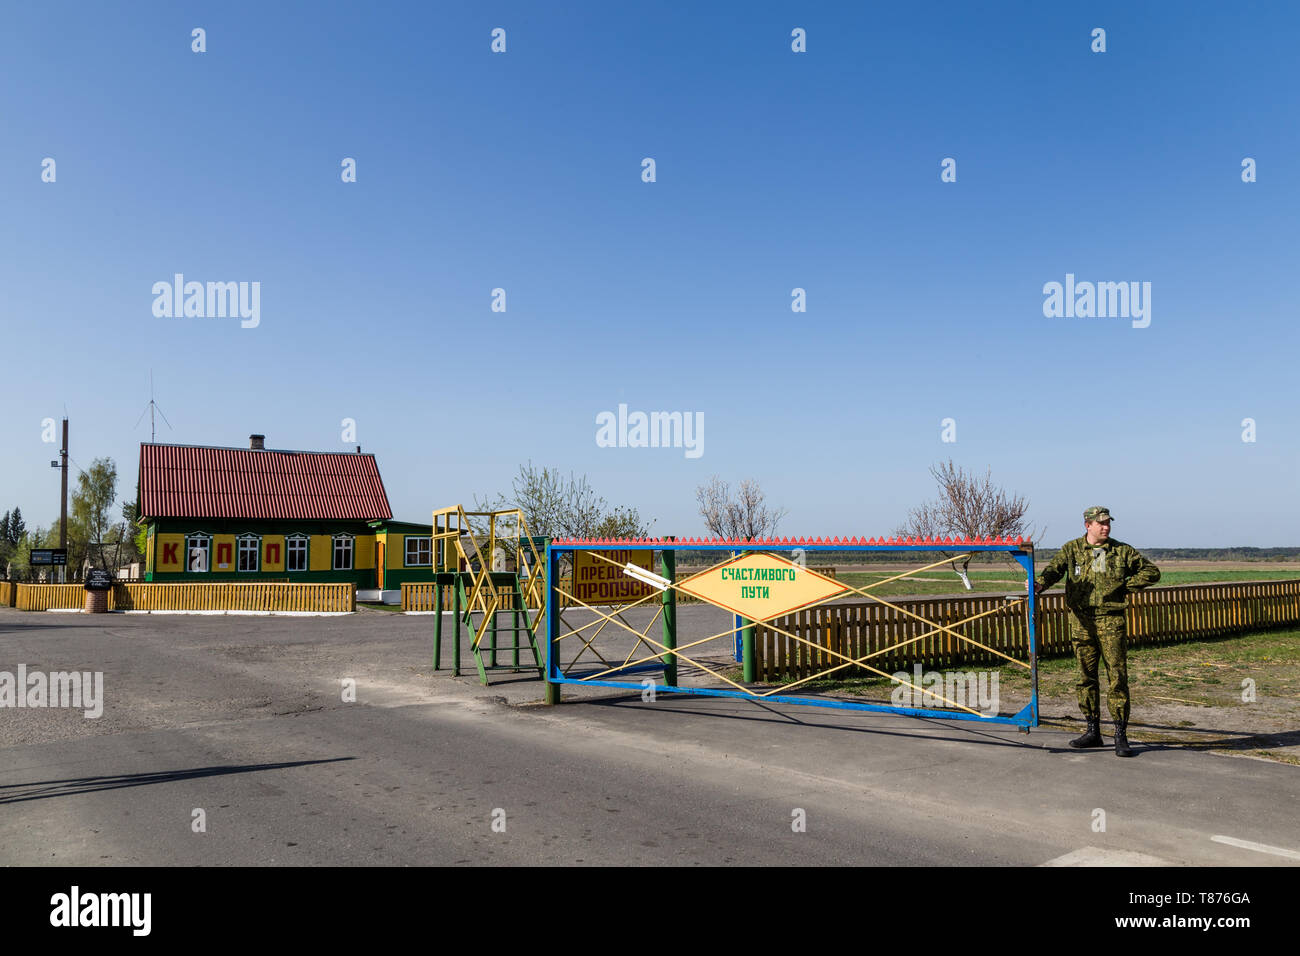 Chojniki, Belarus, - April 26, 2019: Entering the exclusion zone of Chernobyl accident area in Belarus contaminated with radioactive fallout in 1986. Stock Photo